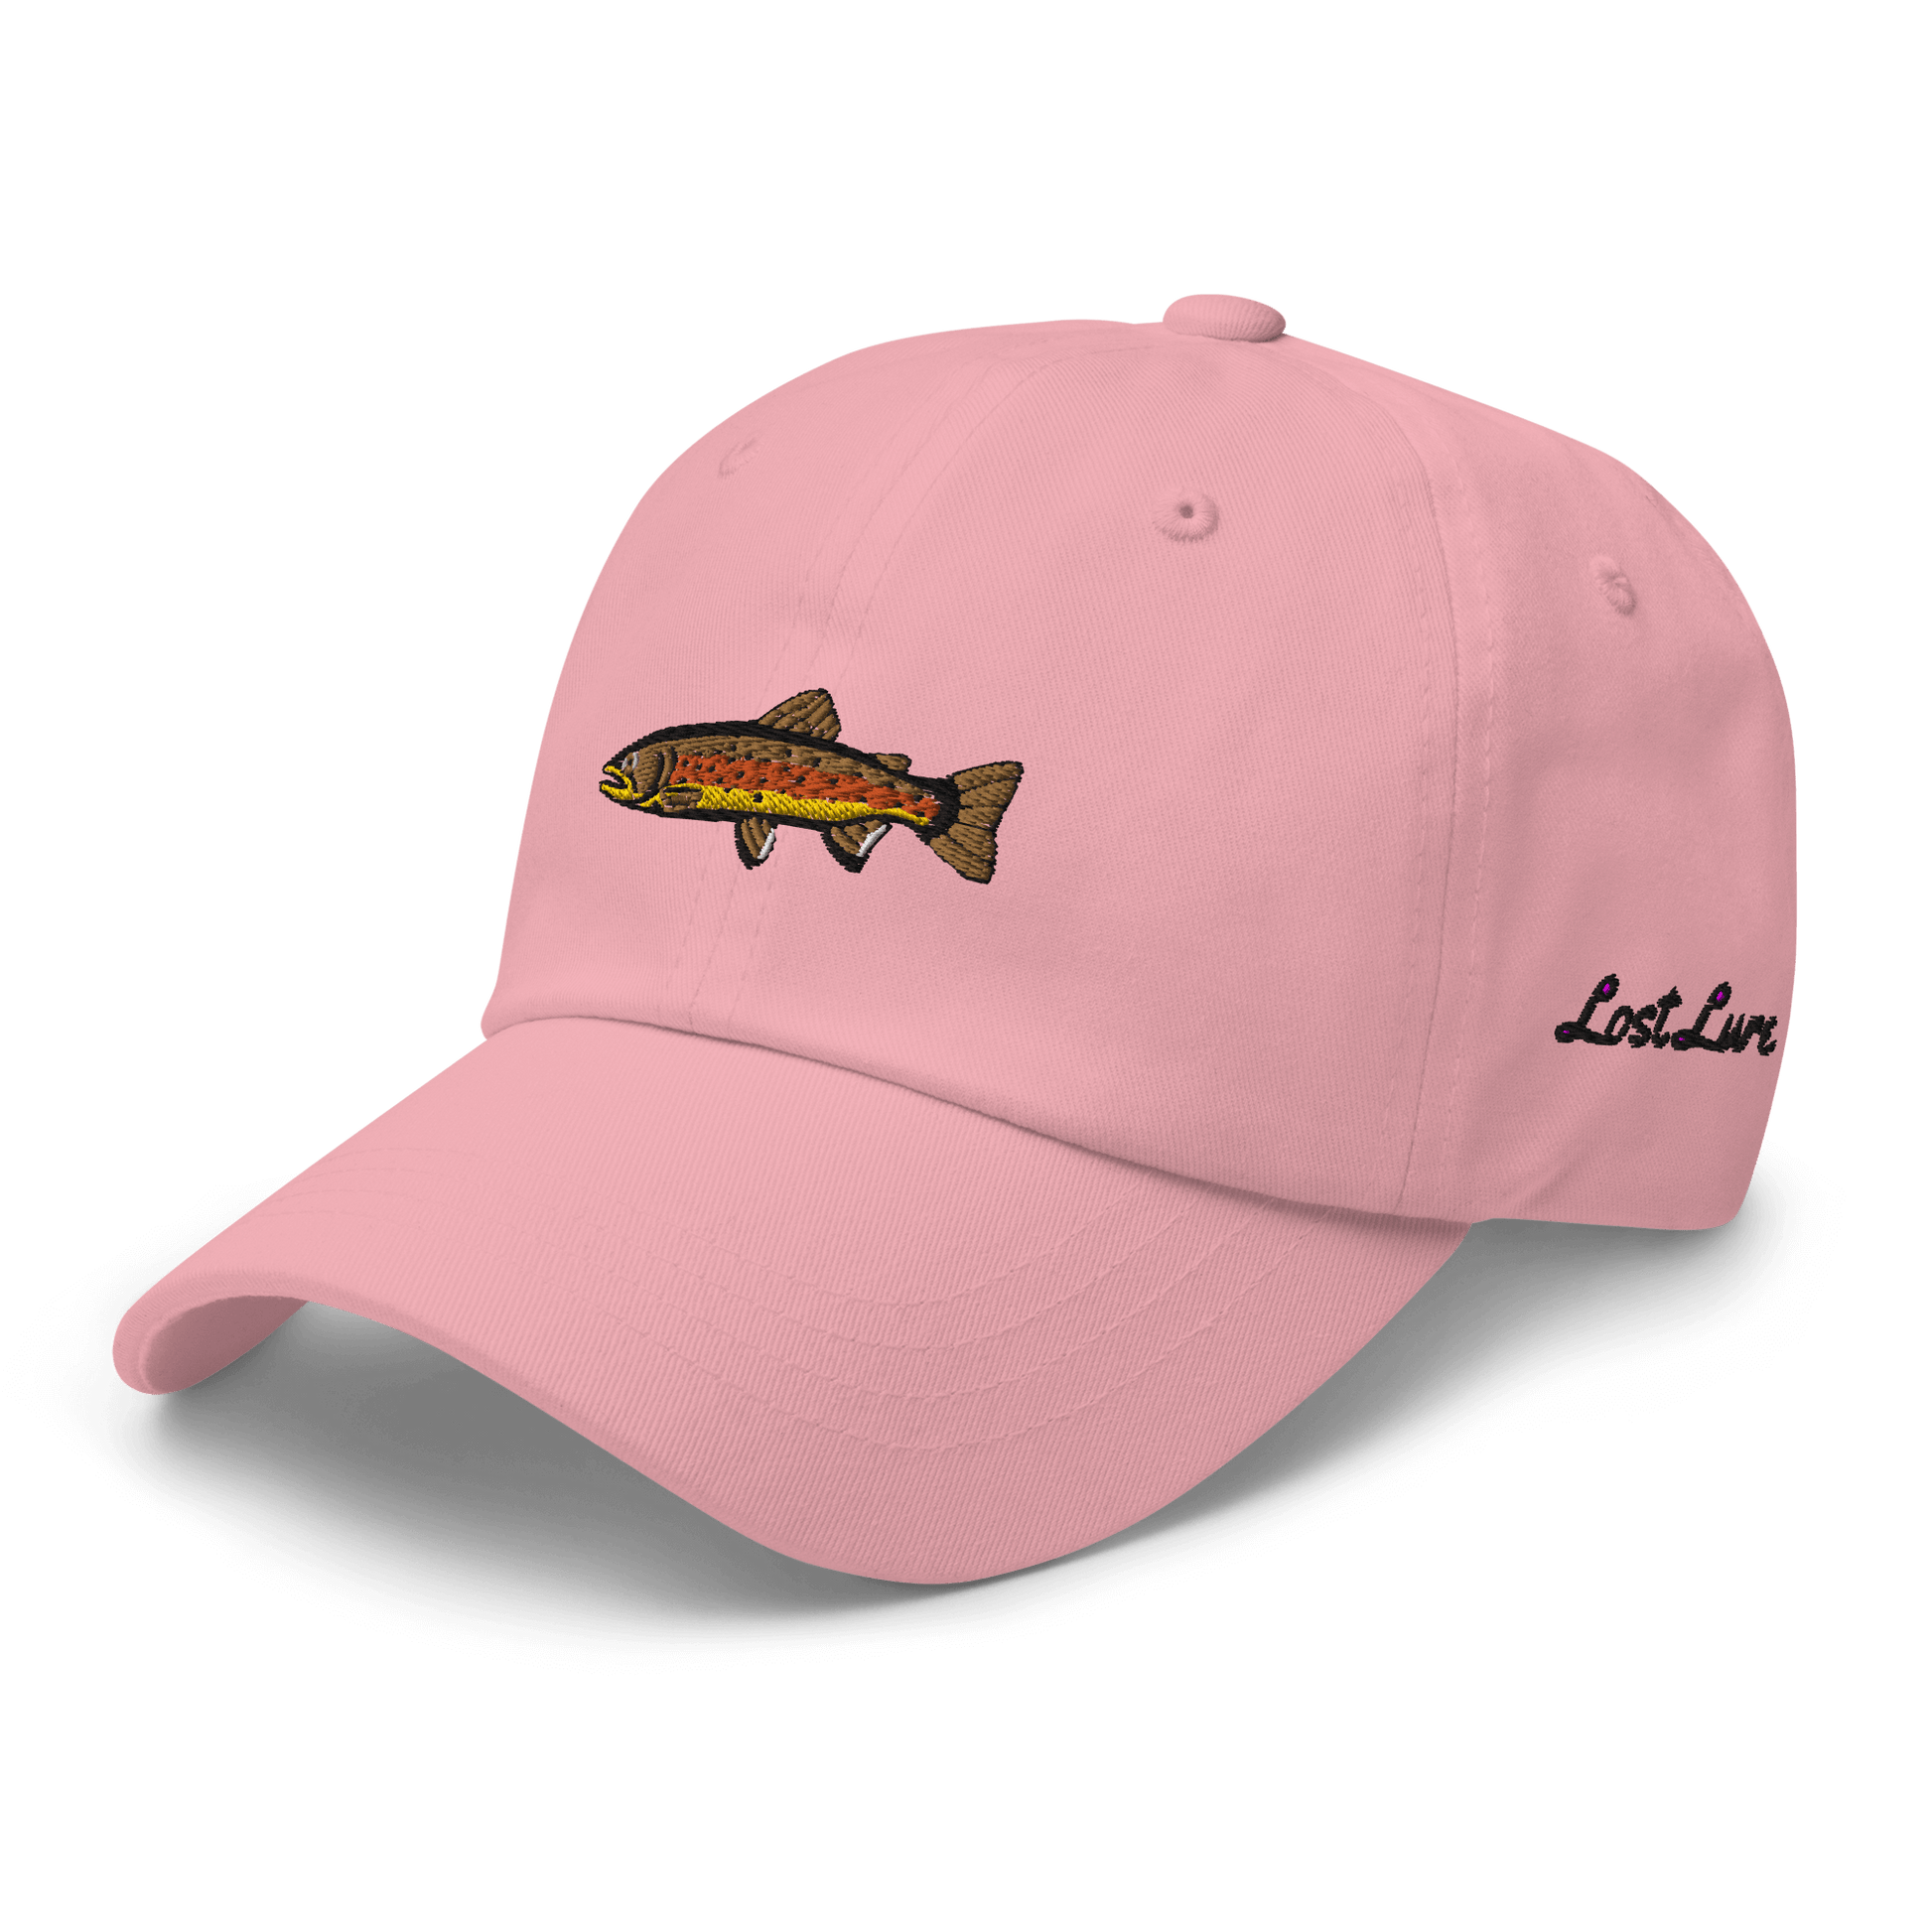 Brown Trout fishing hat. It’s a simple embroidered hat/ dad hat with a brown trout and the lost lure logo on the side. Pink woman’s hat, front left side